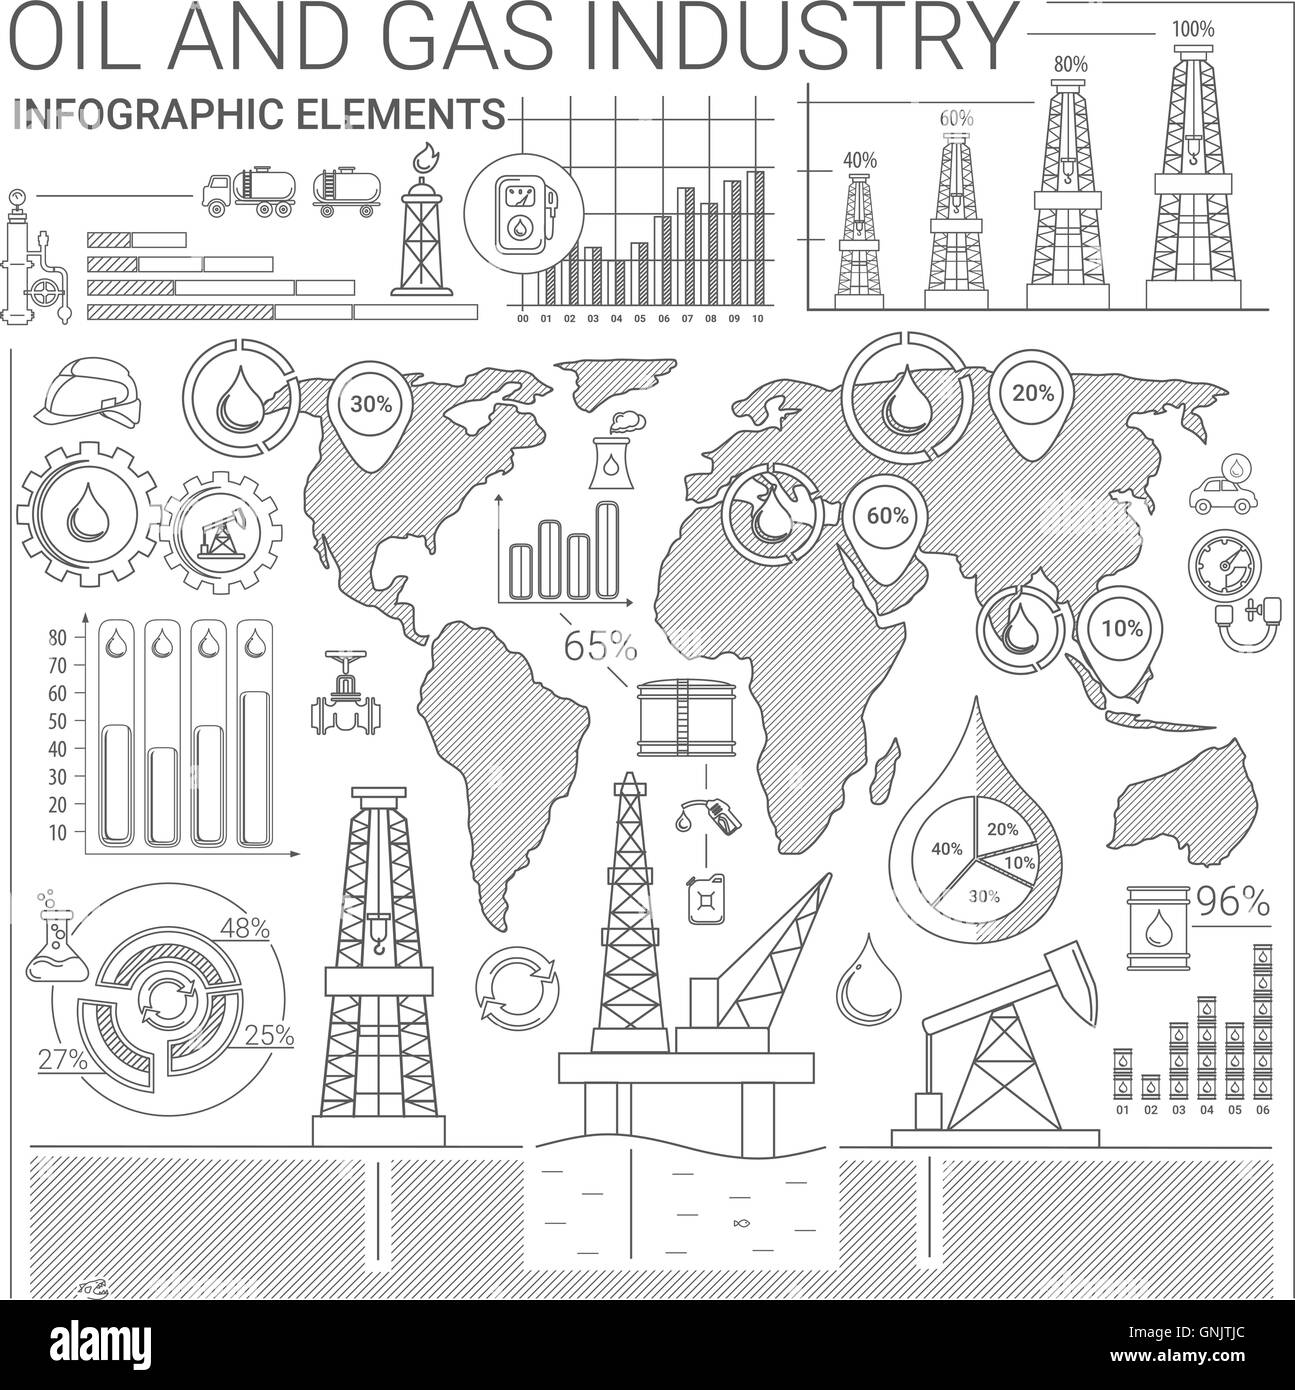 Oil and Gas Industry Infographic Elements Stock Vector